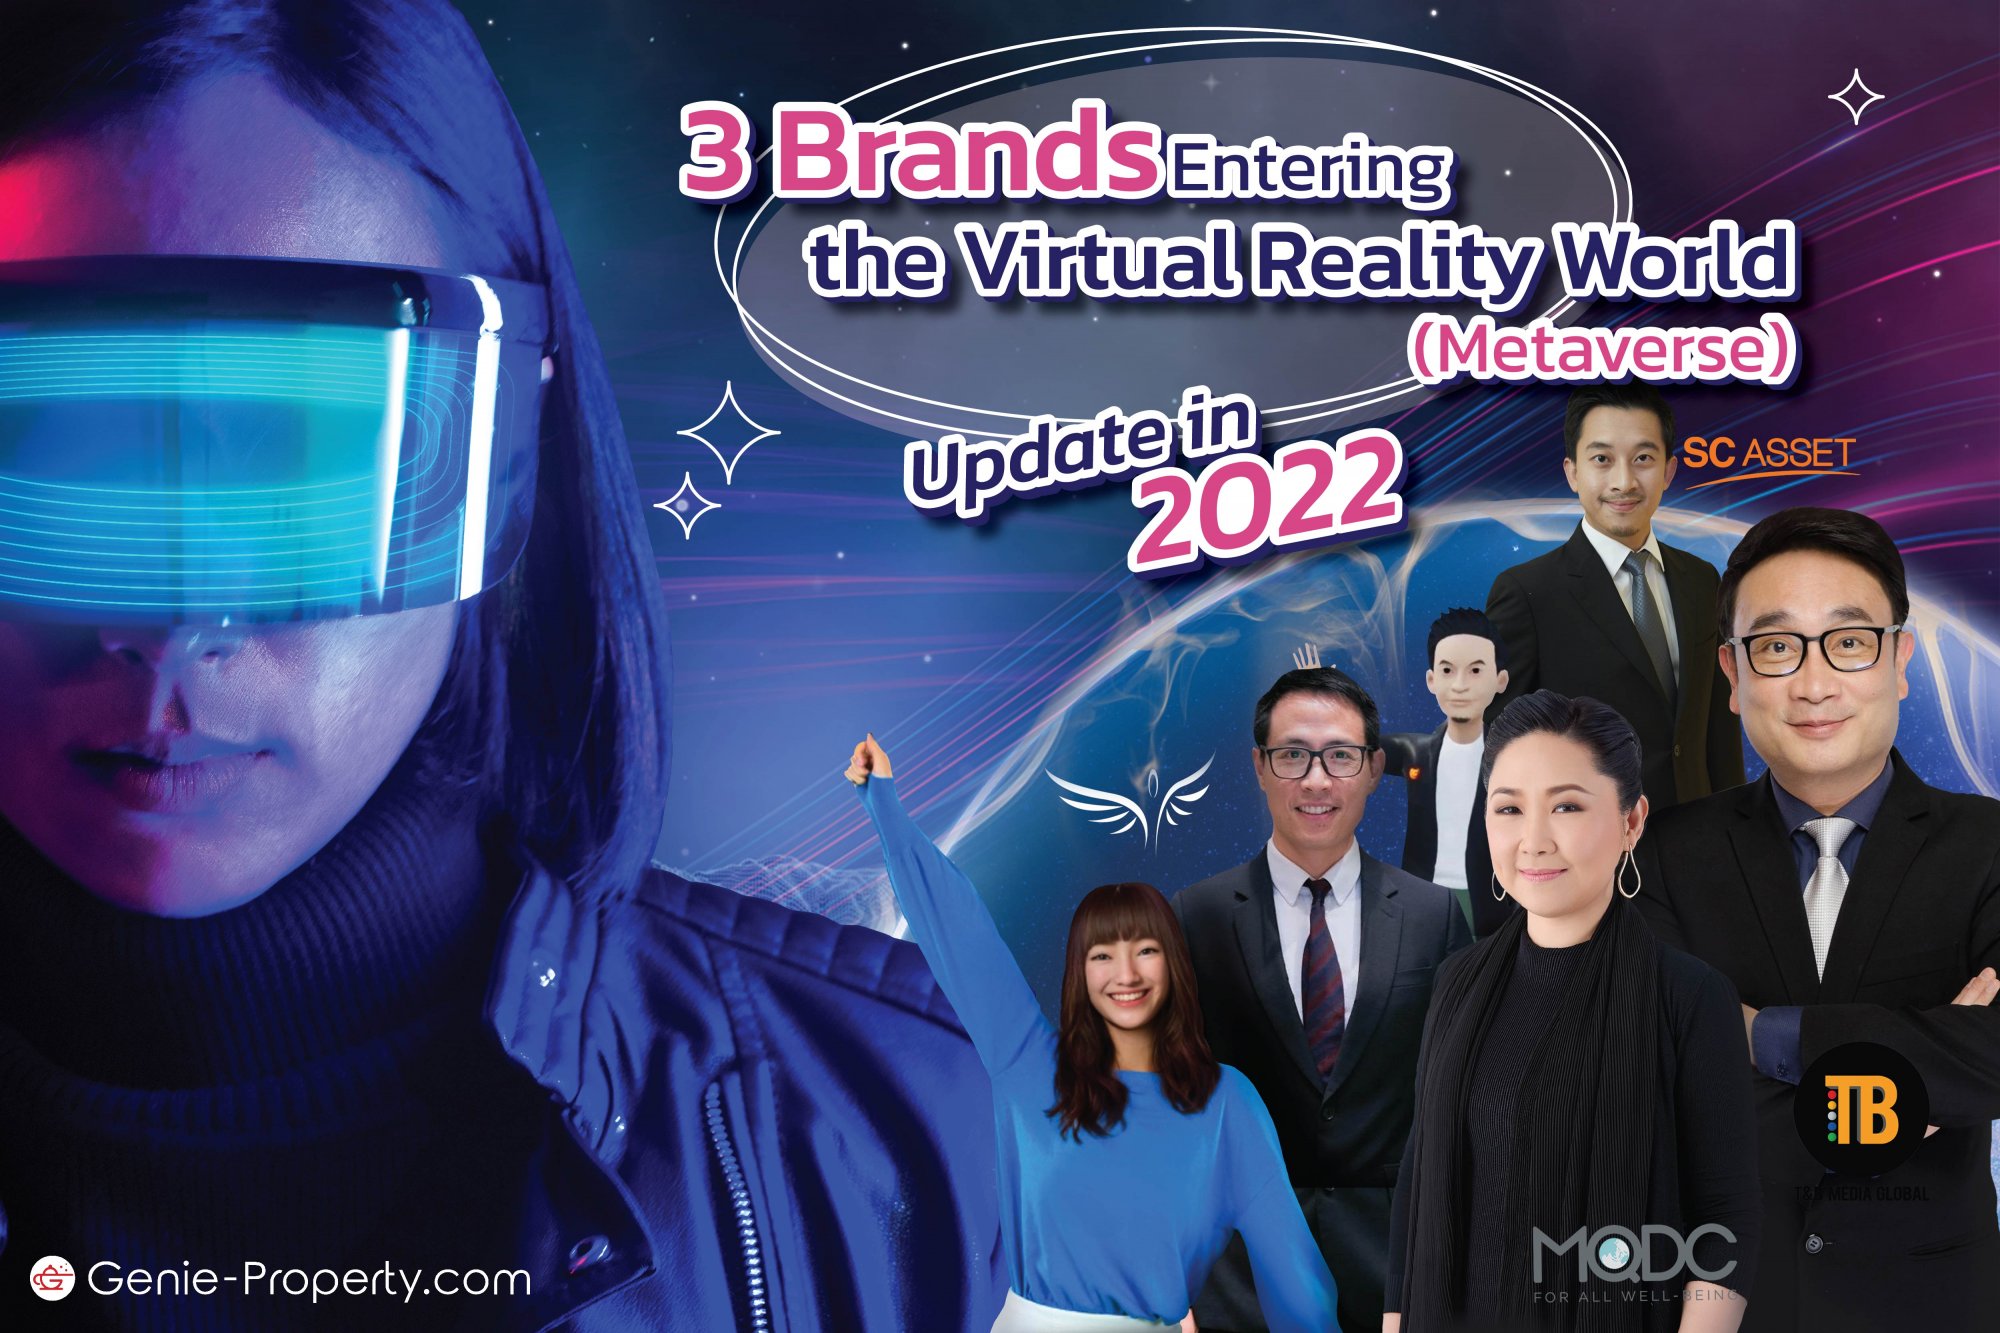 image for 3 Brands Entering the Virtual Reality World (Metaverse) in 2022